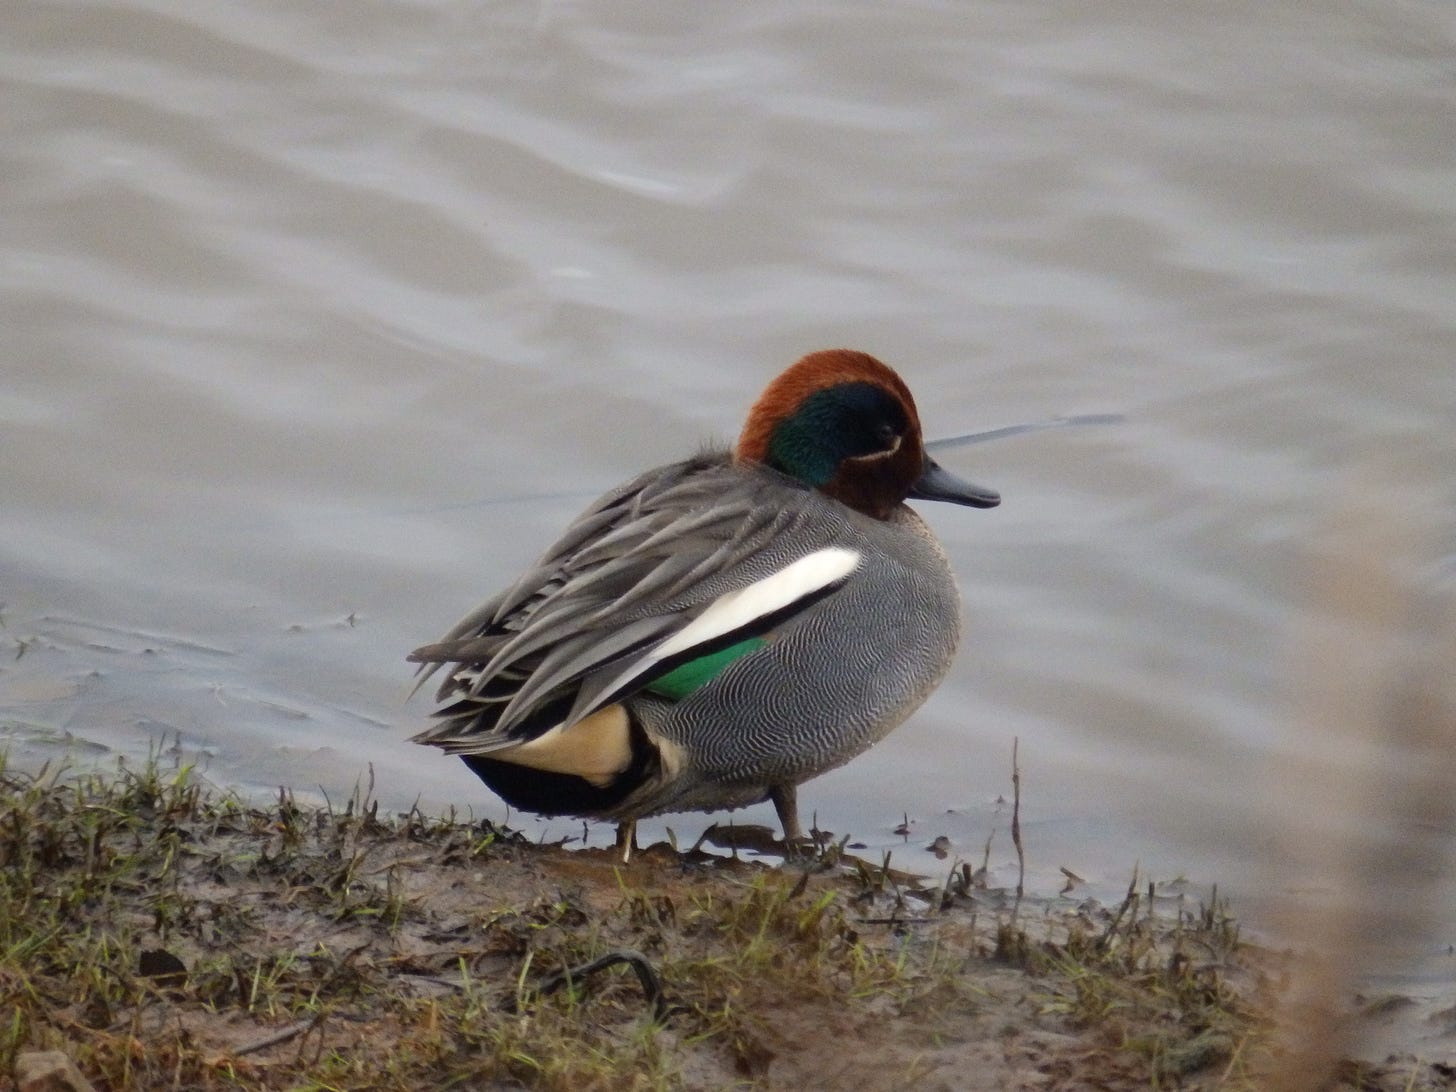 Teal: small duck with chestnut and green head, bright green wing flash, yellow under tail